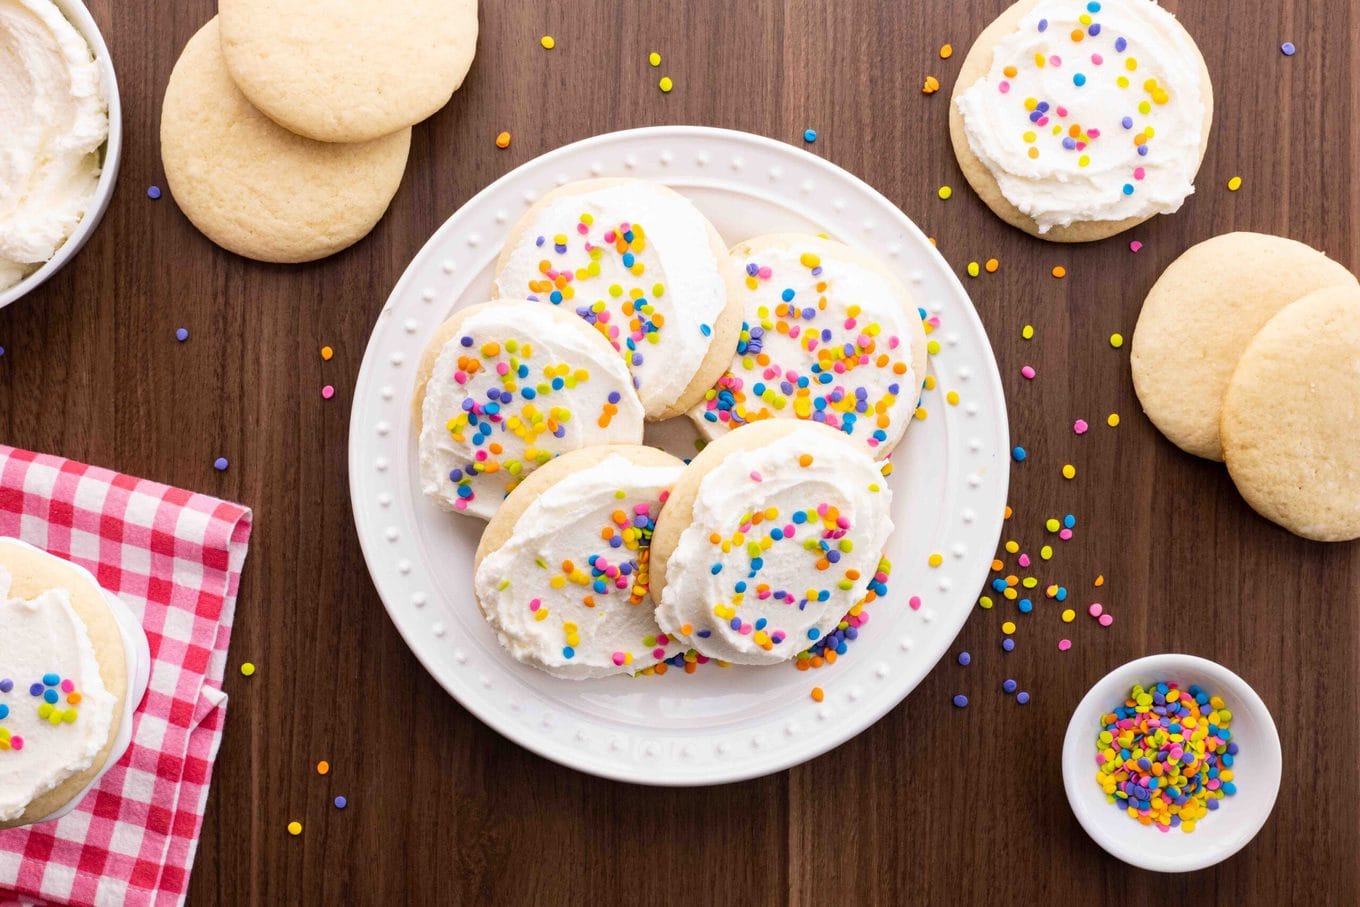 Lofthouse Sugar Cookies with white frosting and colorful sprinkles on plate